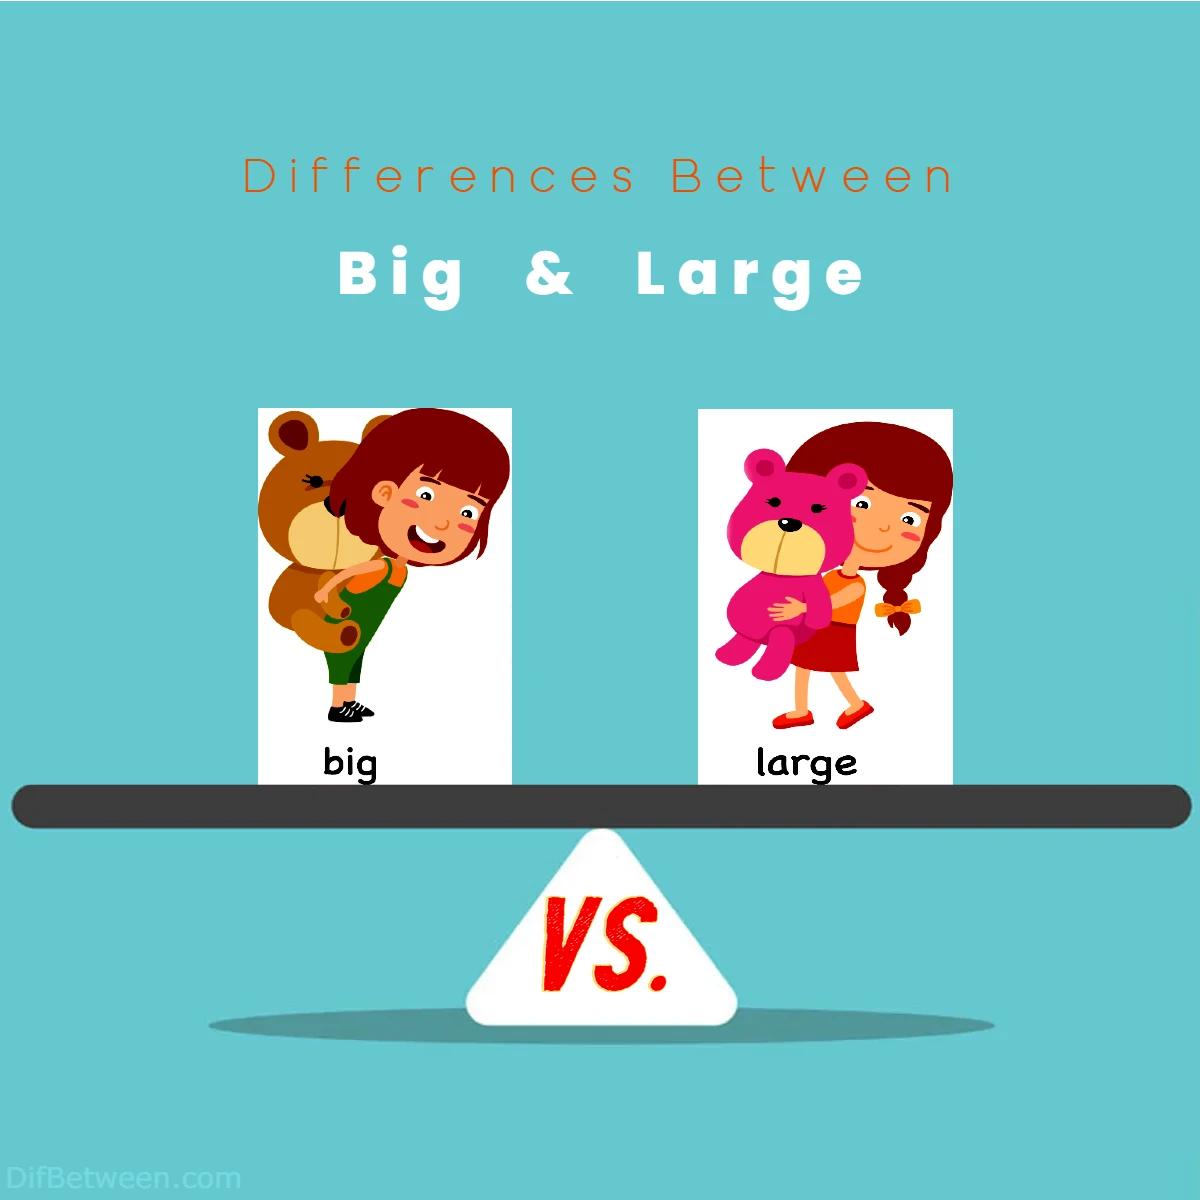 Differences Between Big vs Large